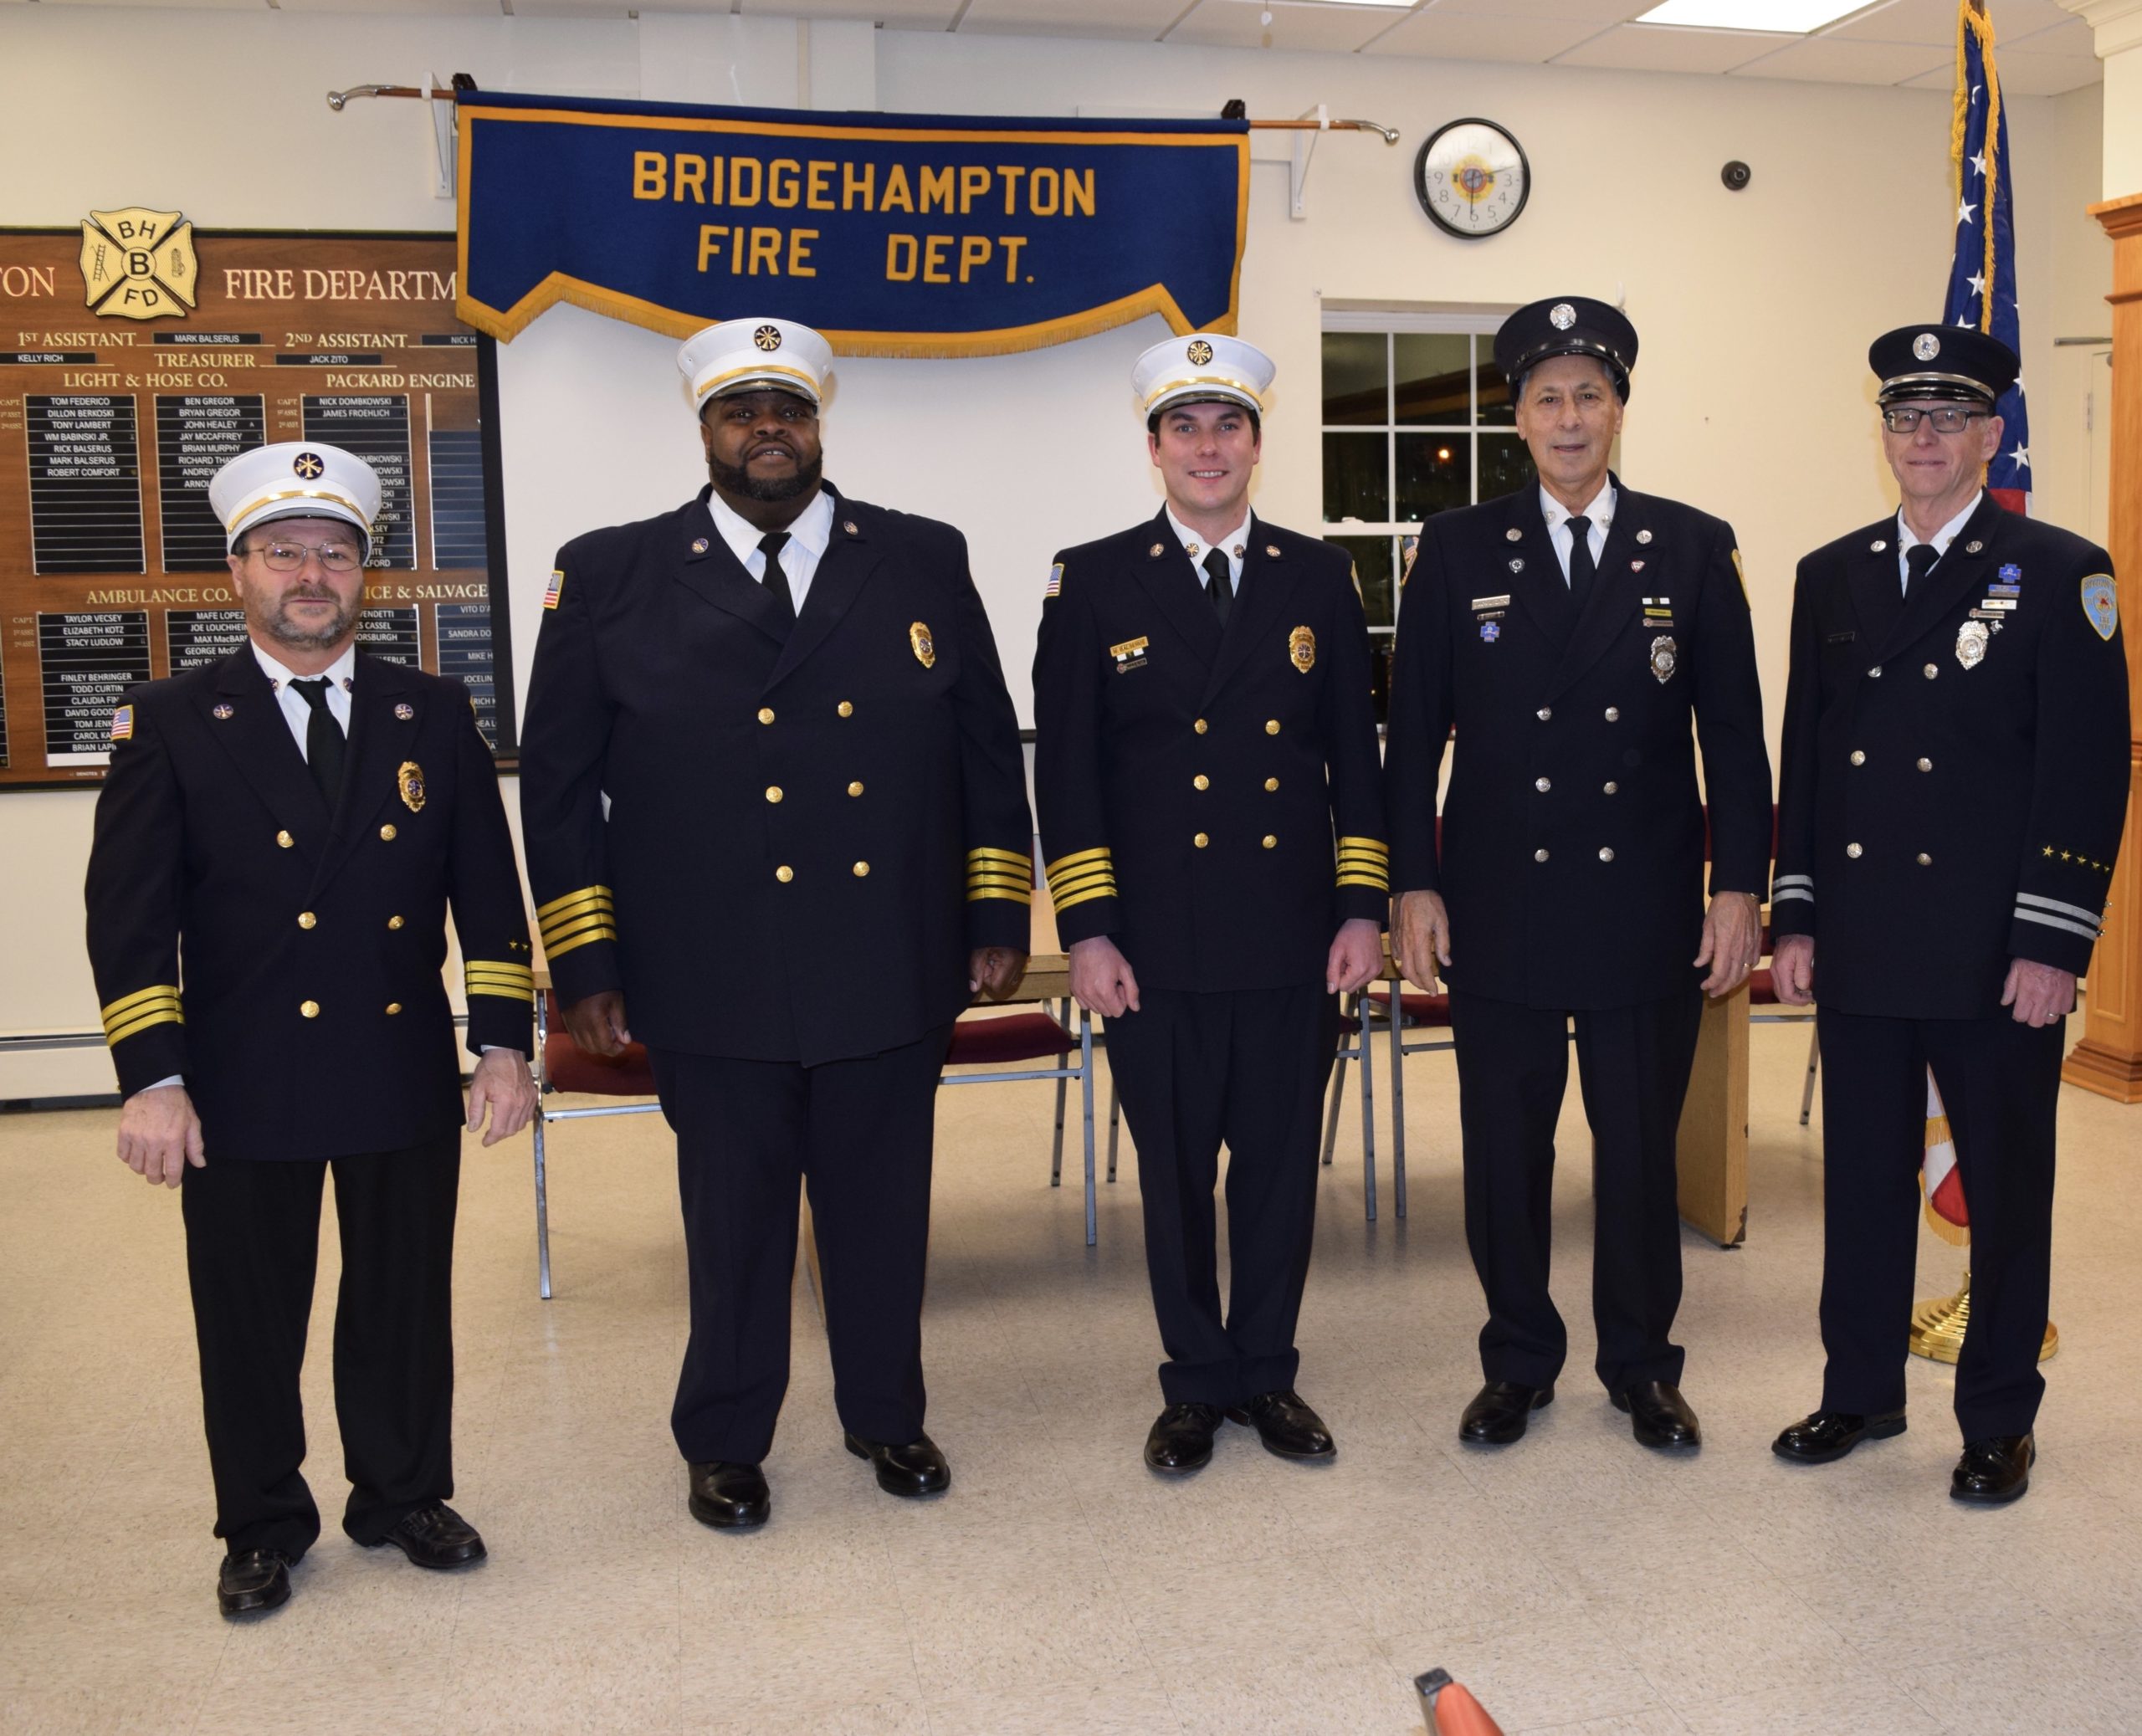 The 2020 officers for the Bridgehampton Fire Department were sworn in on January 8. From left, 2nd Assistant Chief Tom Federico, 1st Assistant Chief Nick Hemby, Chief Mark Balserus, treasurer Jack Zito, and deputy treasurer Harry Halsey. Richard Kelly, not in photo, was sworn in as secretary. 